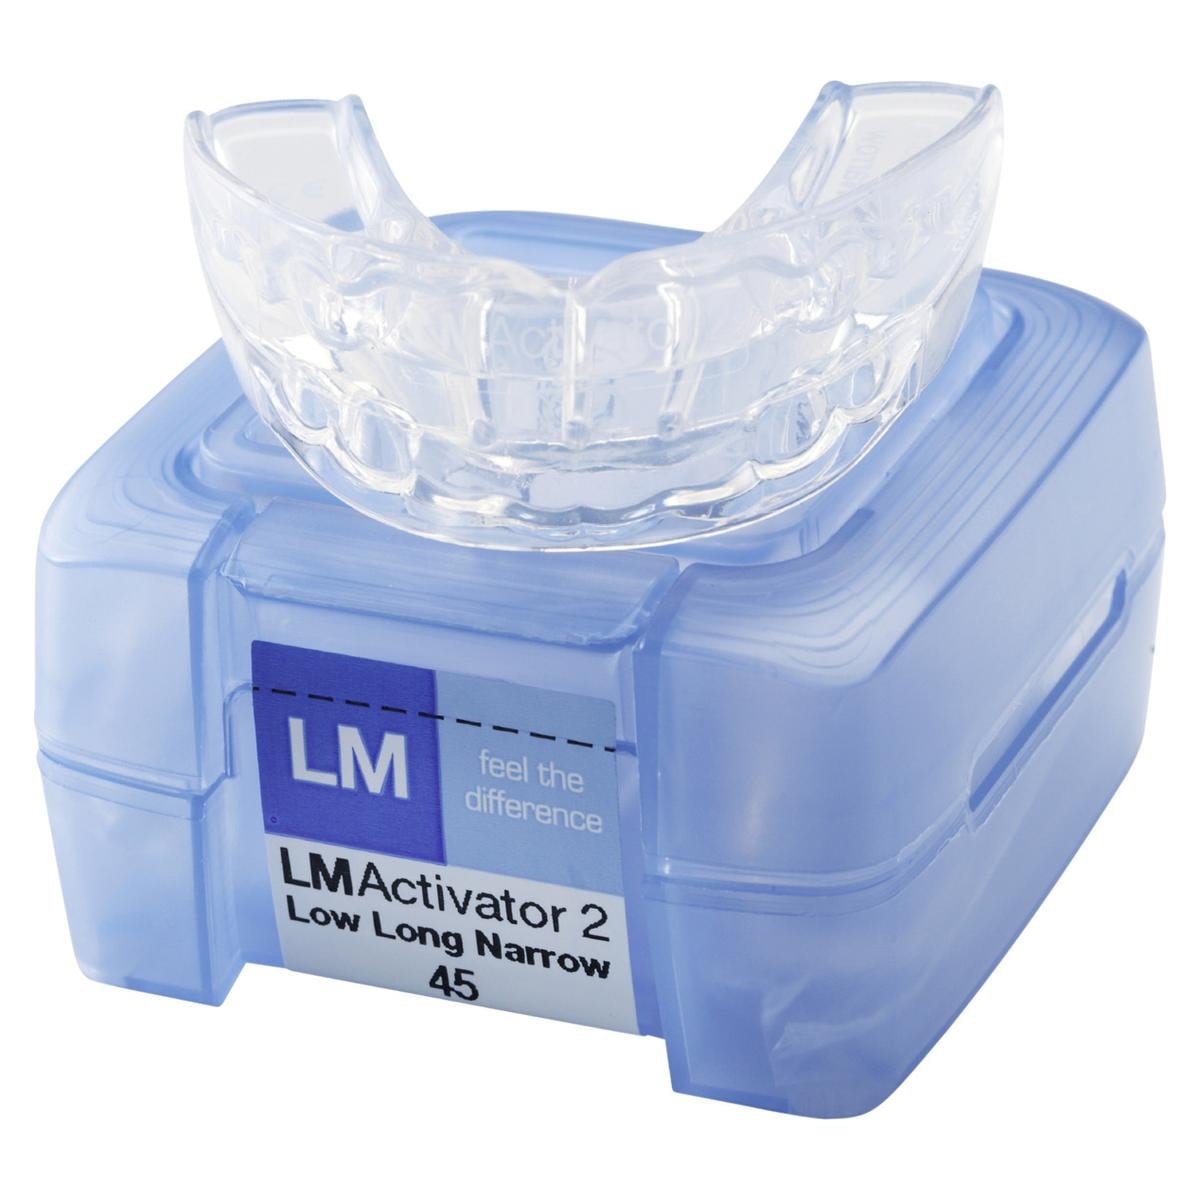 LM Activator 2 Low Long - Narrow - Size 55 (94255LLN)